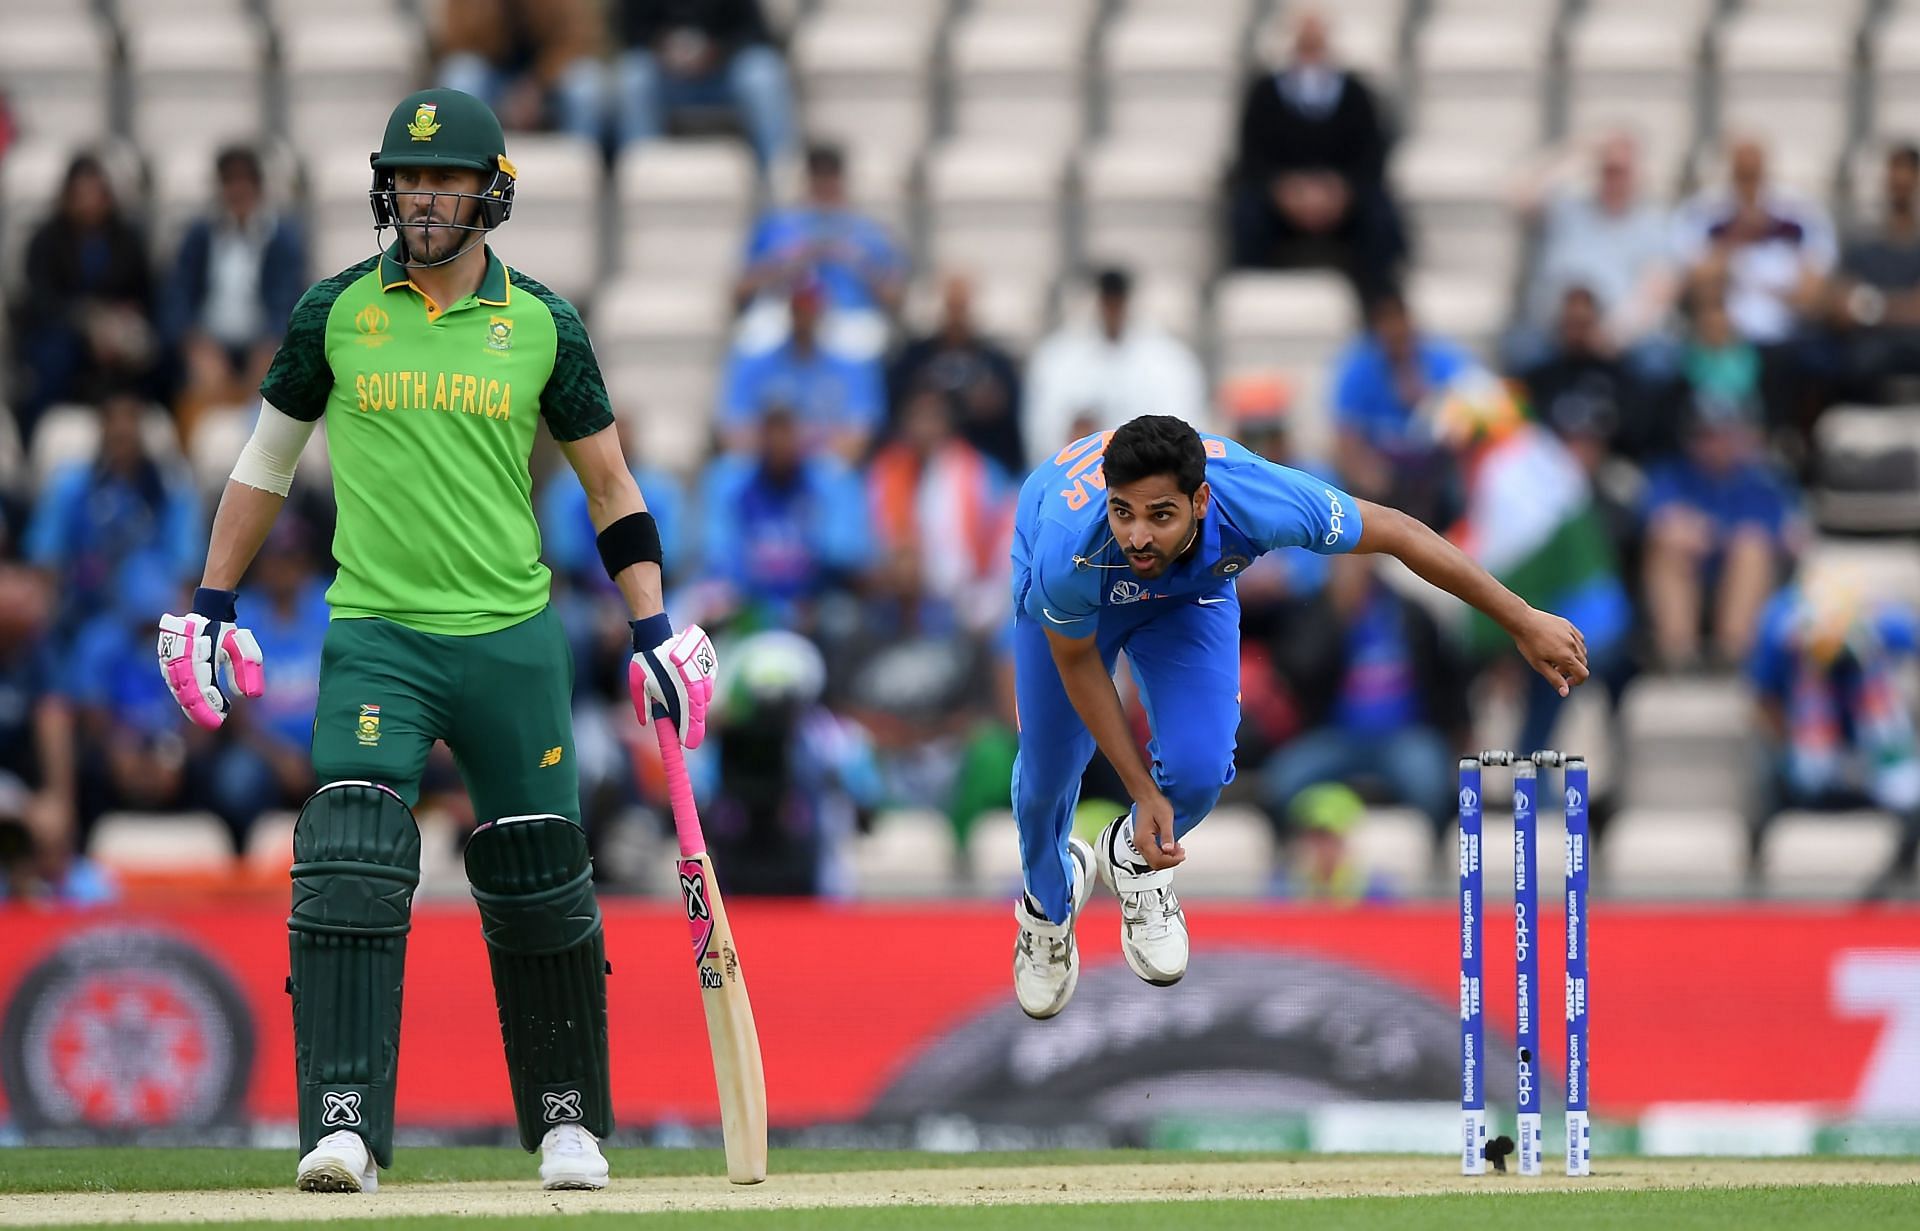 South Africa v India - ICC Cricket World Cup 2019 (Image courtesy: Getty Images)